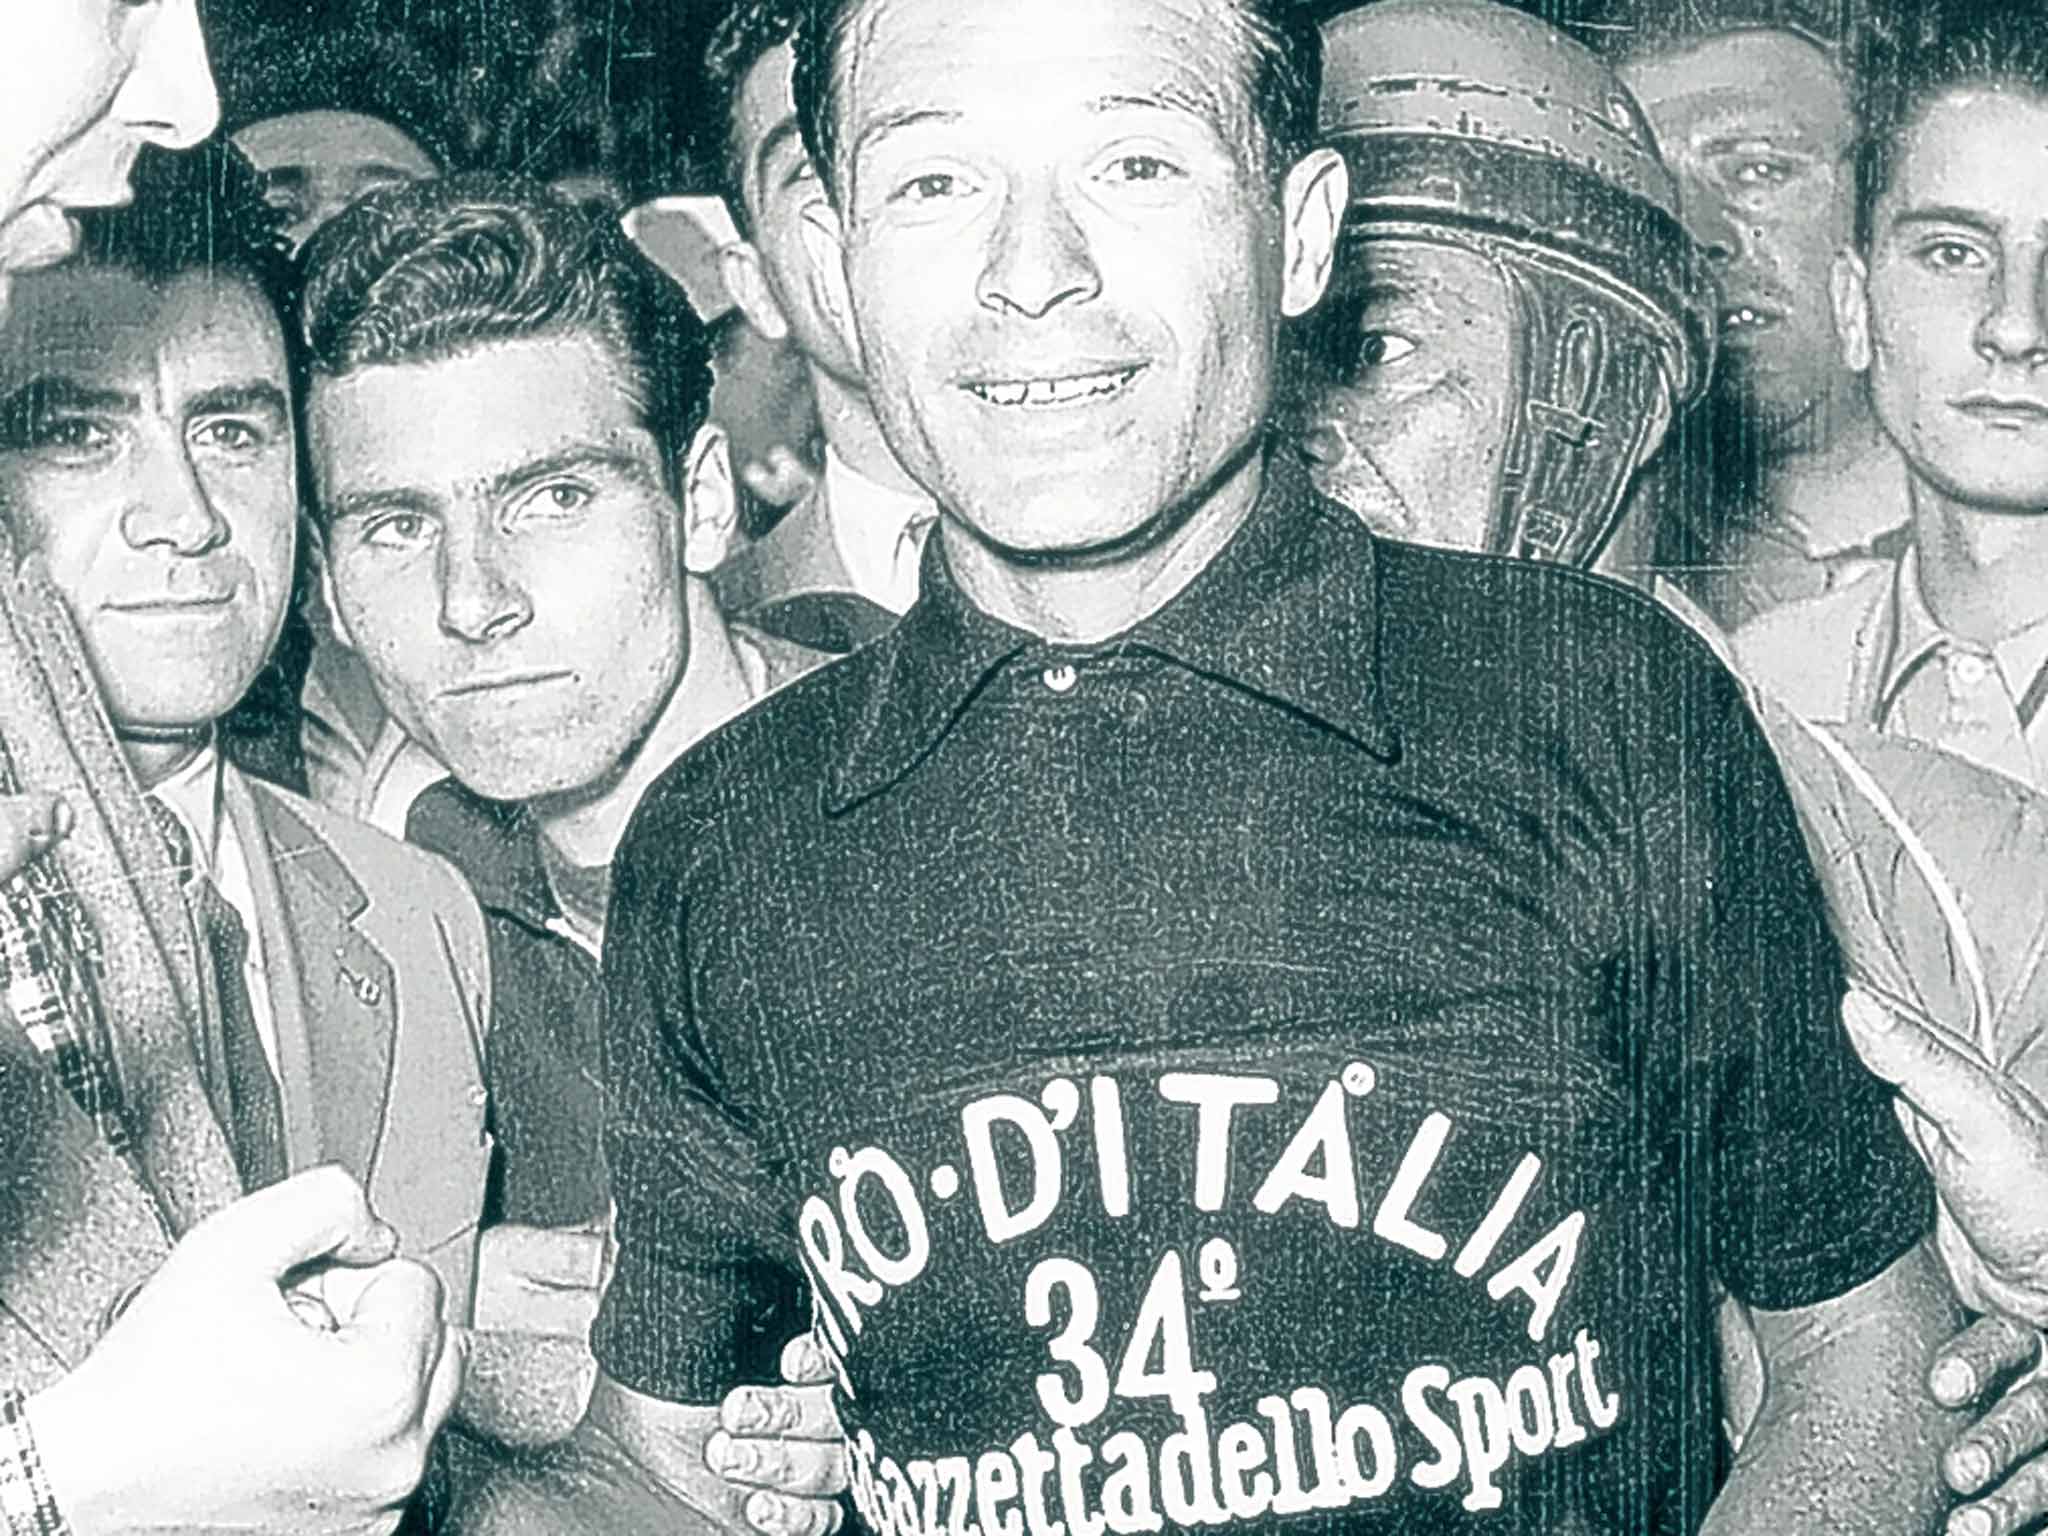 Pinarello in 1951 in his 'maglia nera', which brought fame - and the money to found his bicycle empire